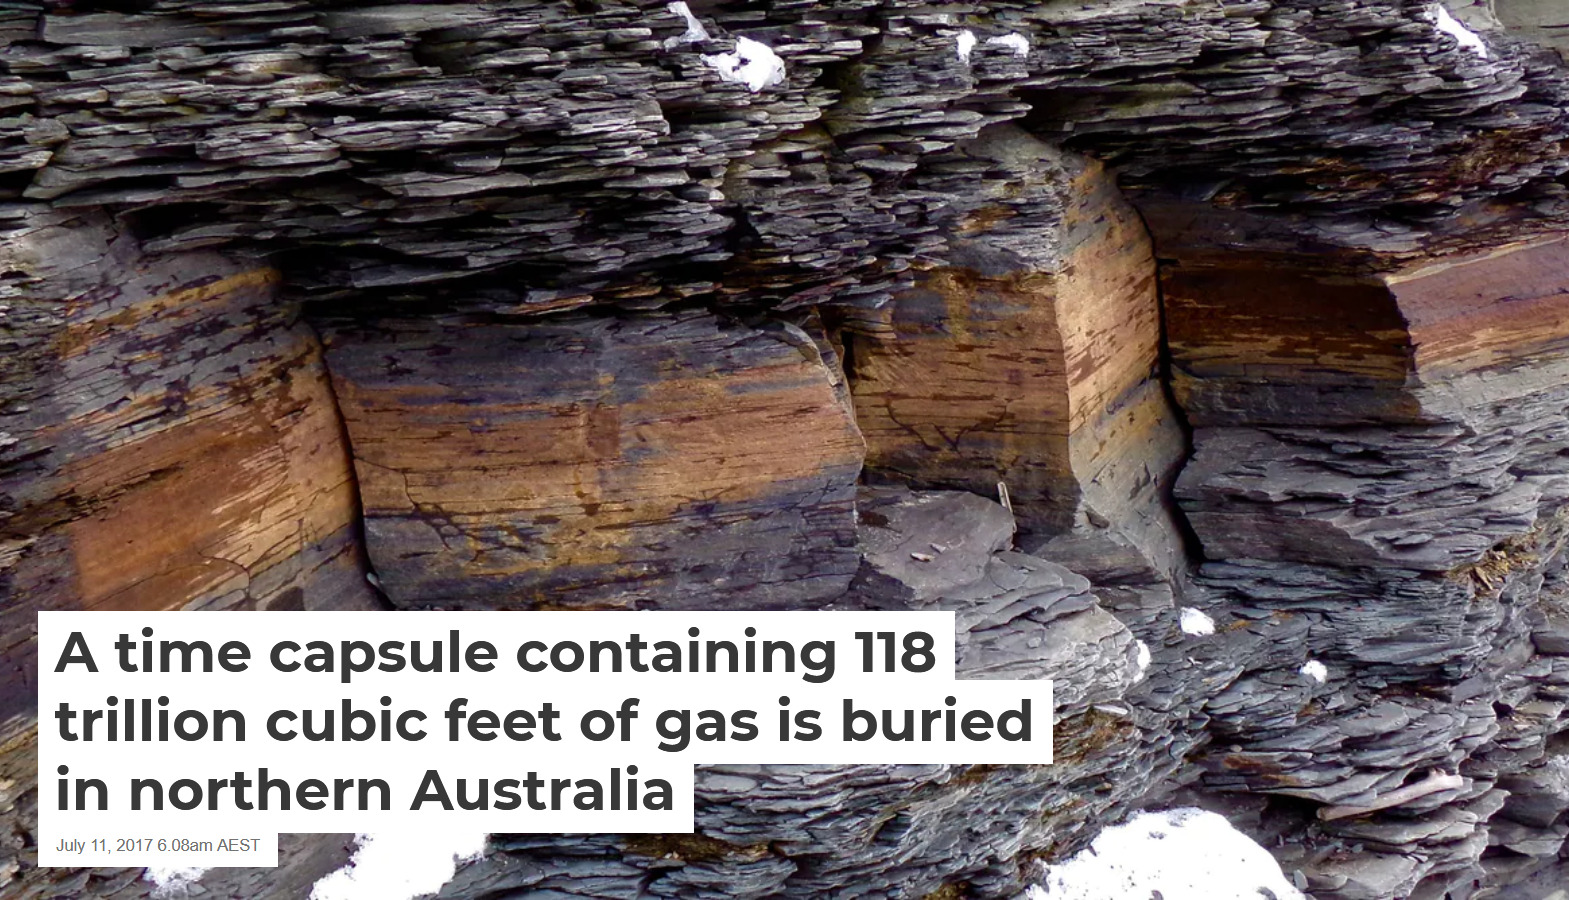 A time capsule containing 118 trillion cubic feet of gas is buried in northern Australia